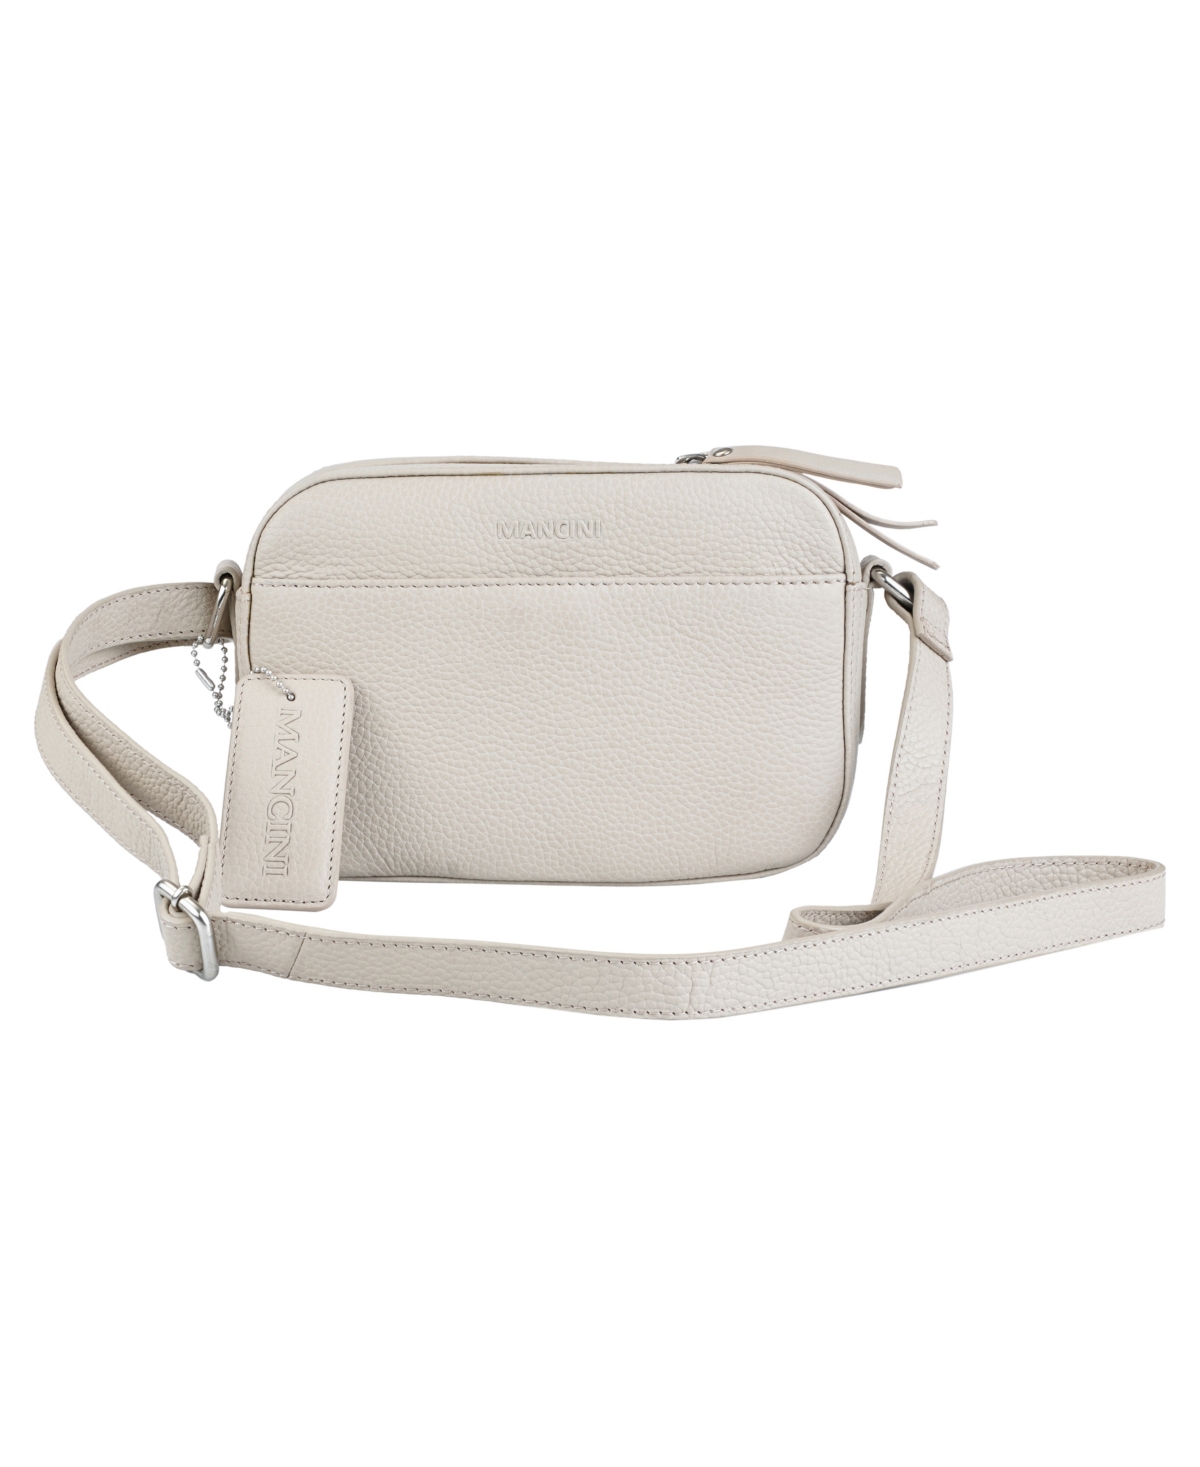 Mancini Pebbled Collection Clara Leather Small Crossbody Bag In Taupe